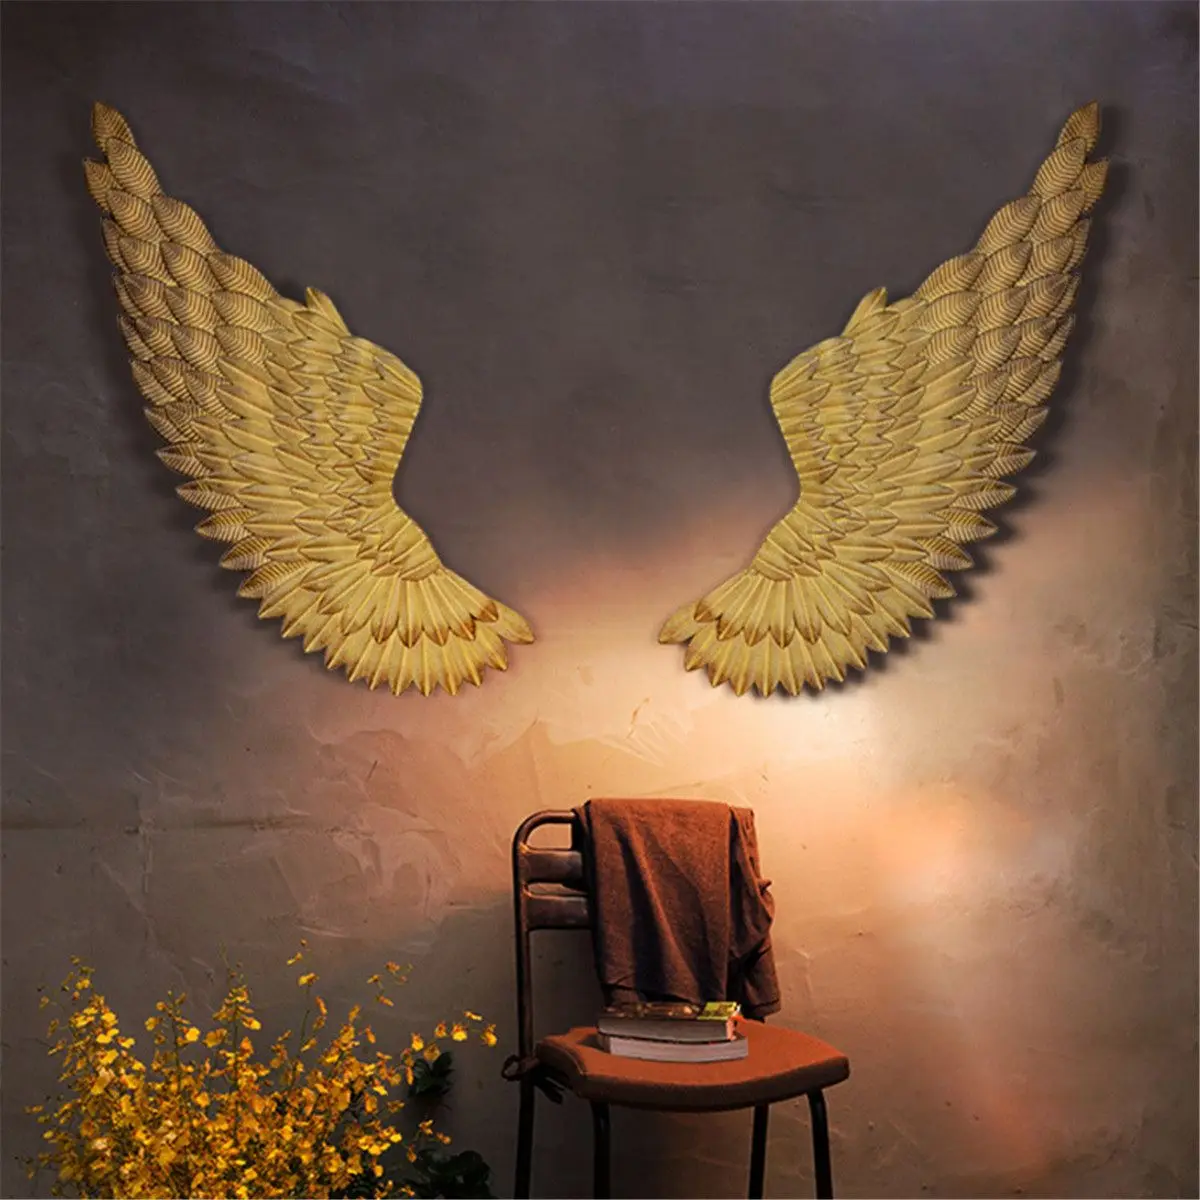 

Ancient Wall Decoration Metal Angel Wings Bar Coffee Shop Wall Decoration Home Bedroom Living room decor Christmas Industry